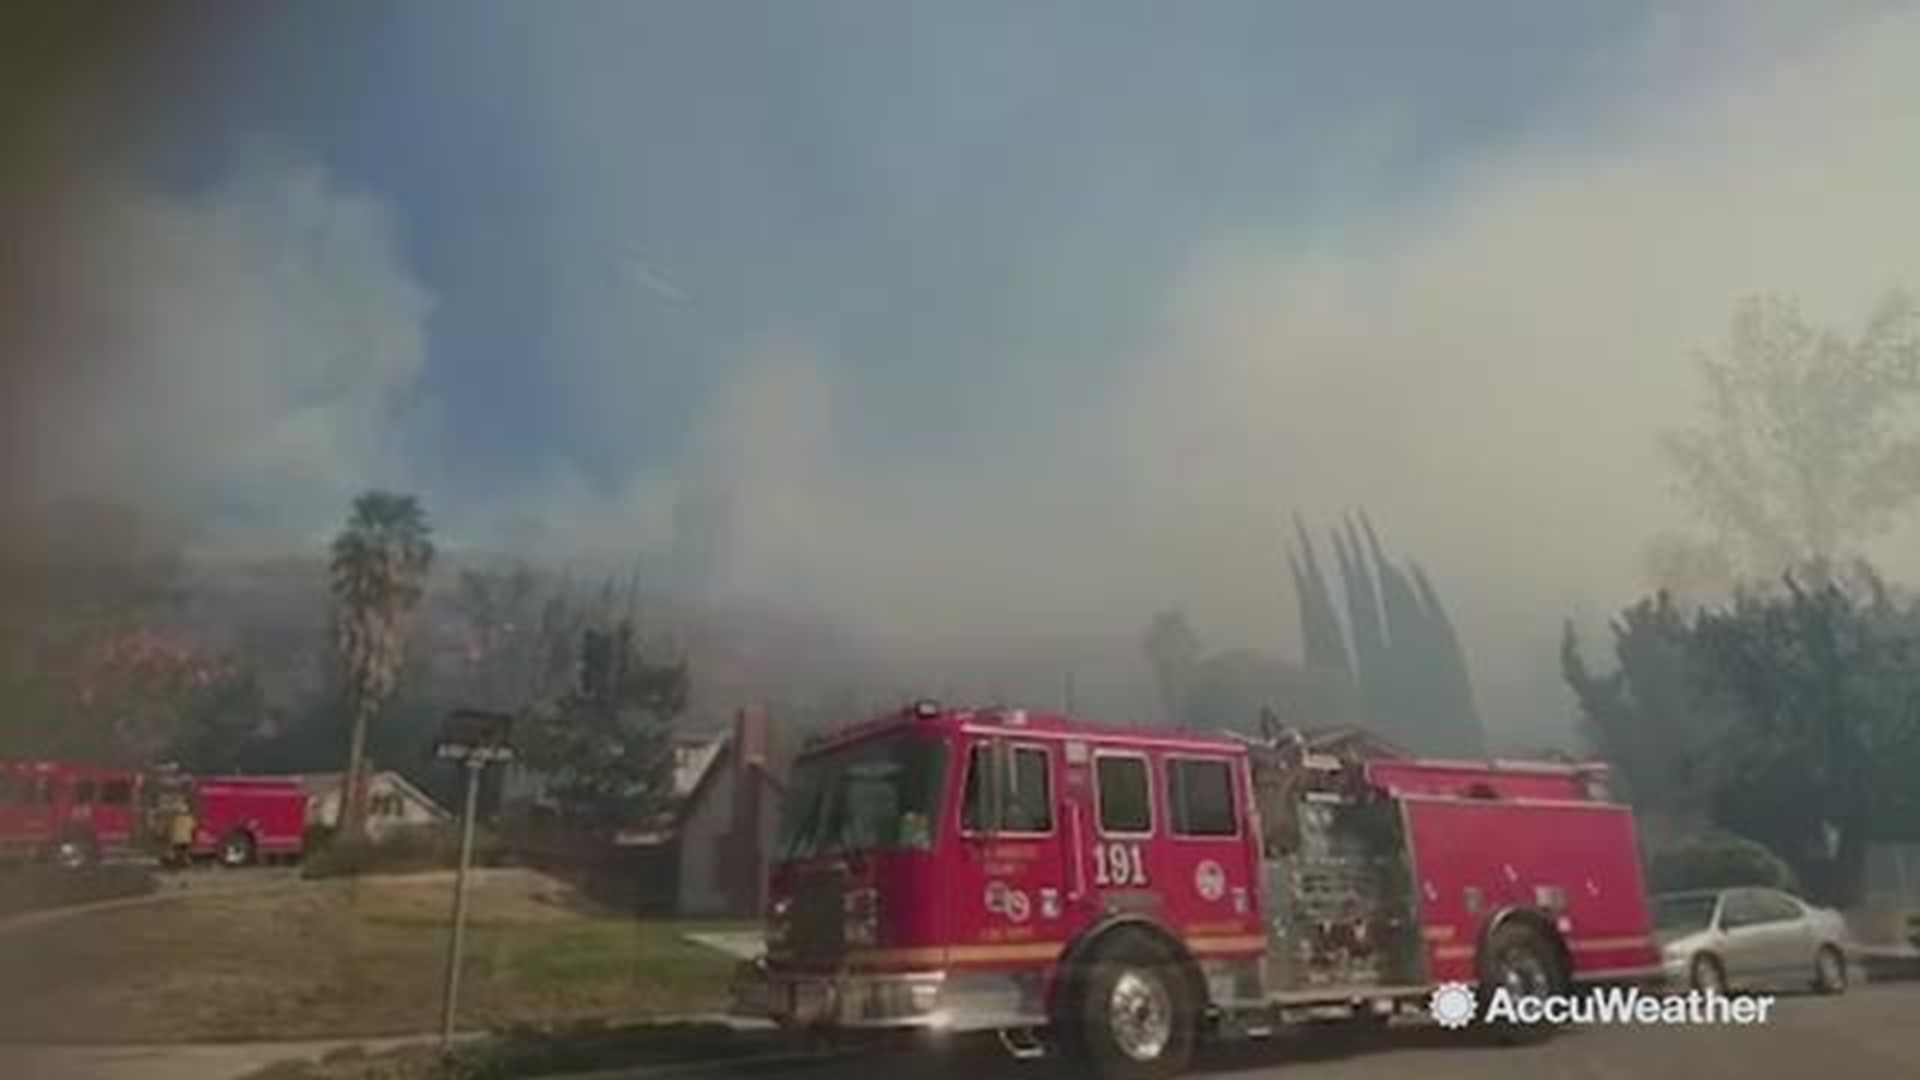 Clips show active flames and smoke in the sky through parks of Simi Valley, a city sitting next to Thousand Oaks where the wildfire believed to have begun.